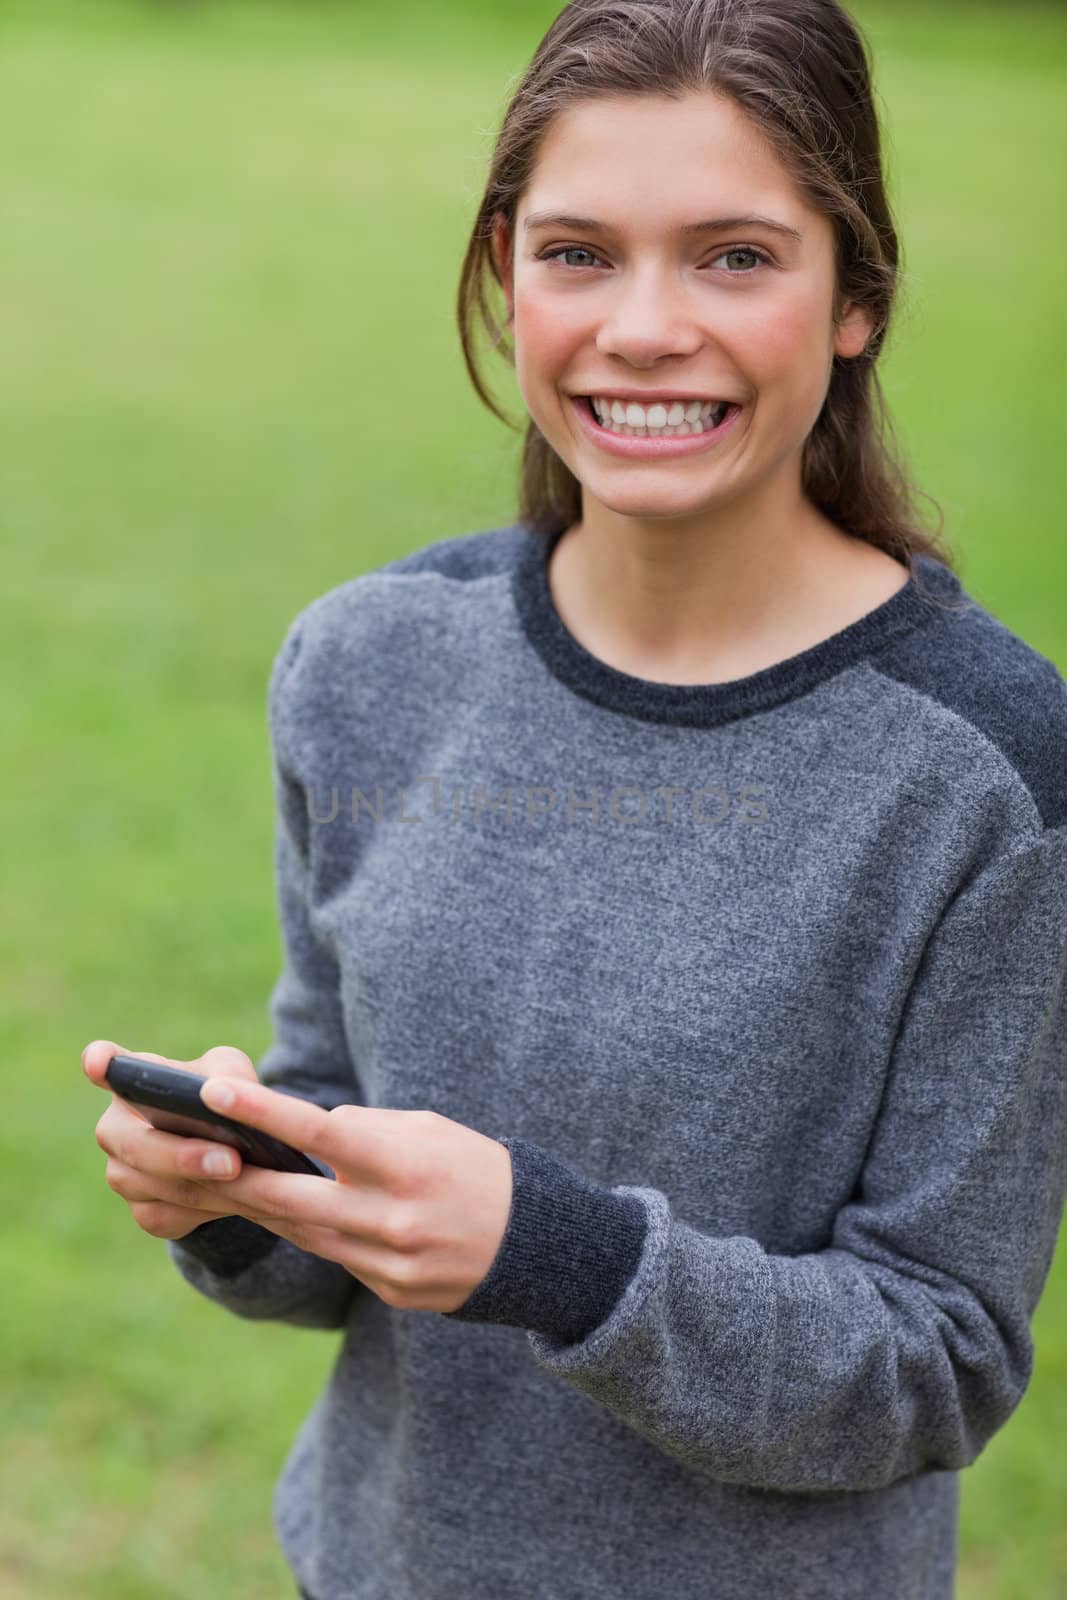 Young smiling adult looking straight at the camera while using her mobile phone